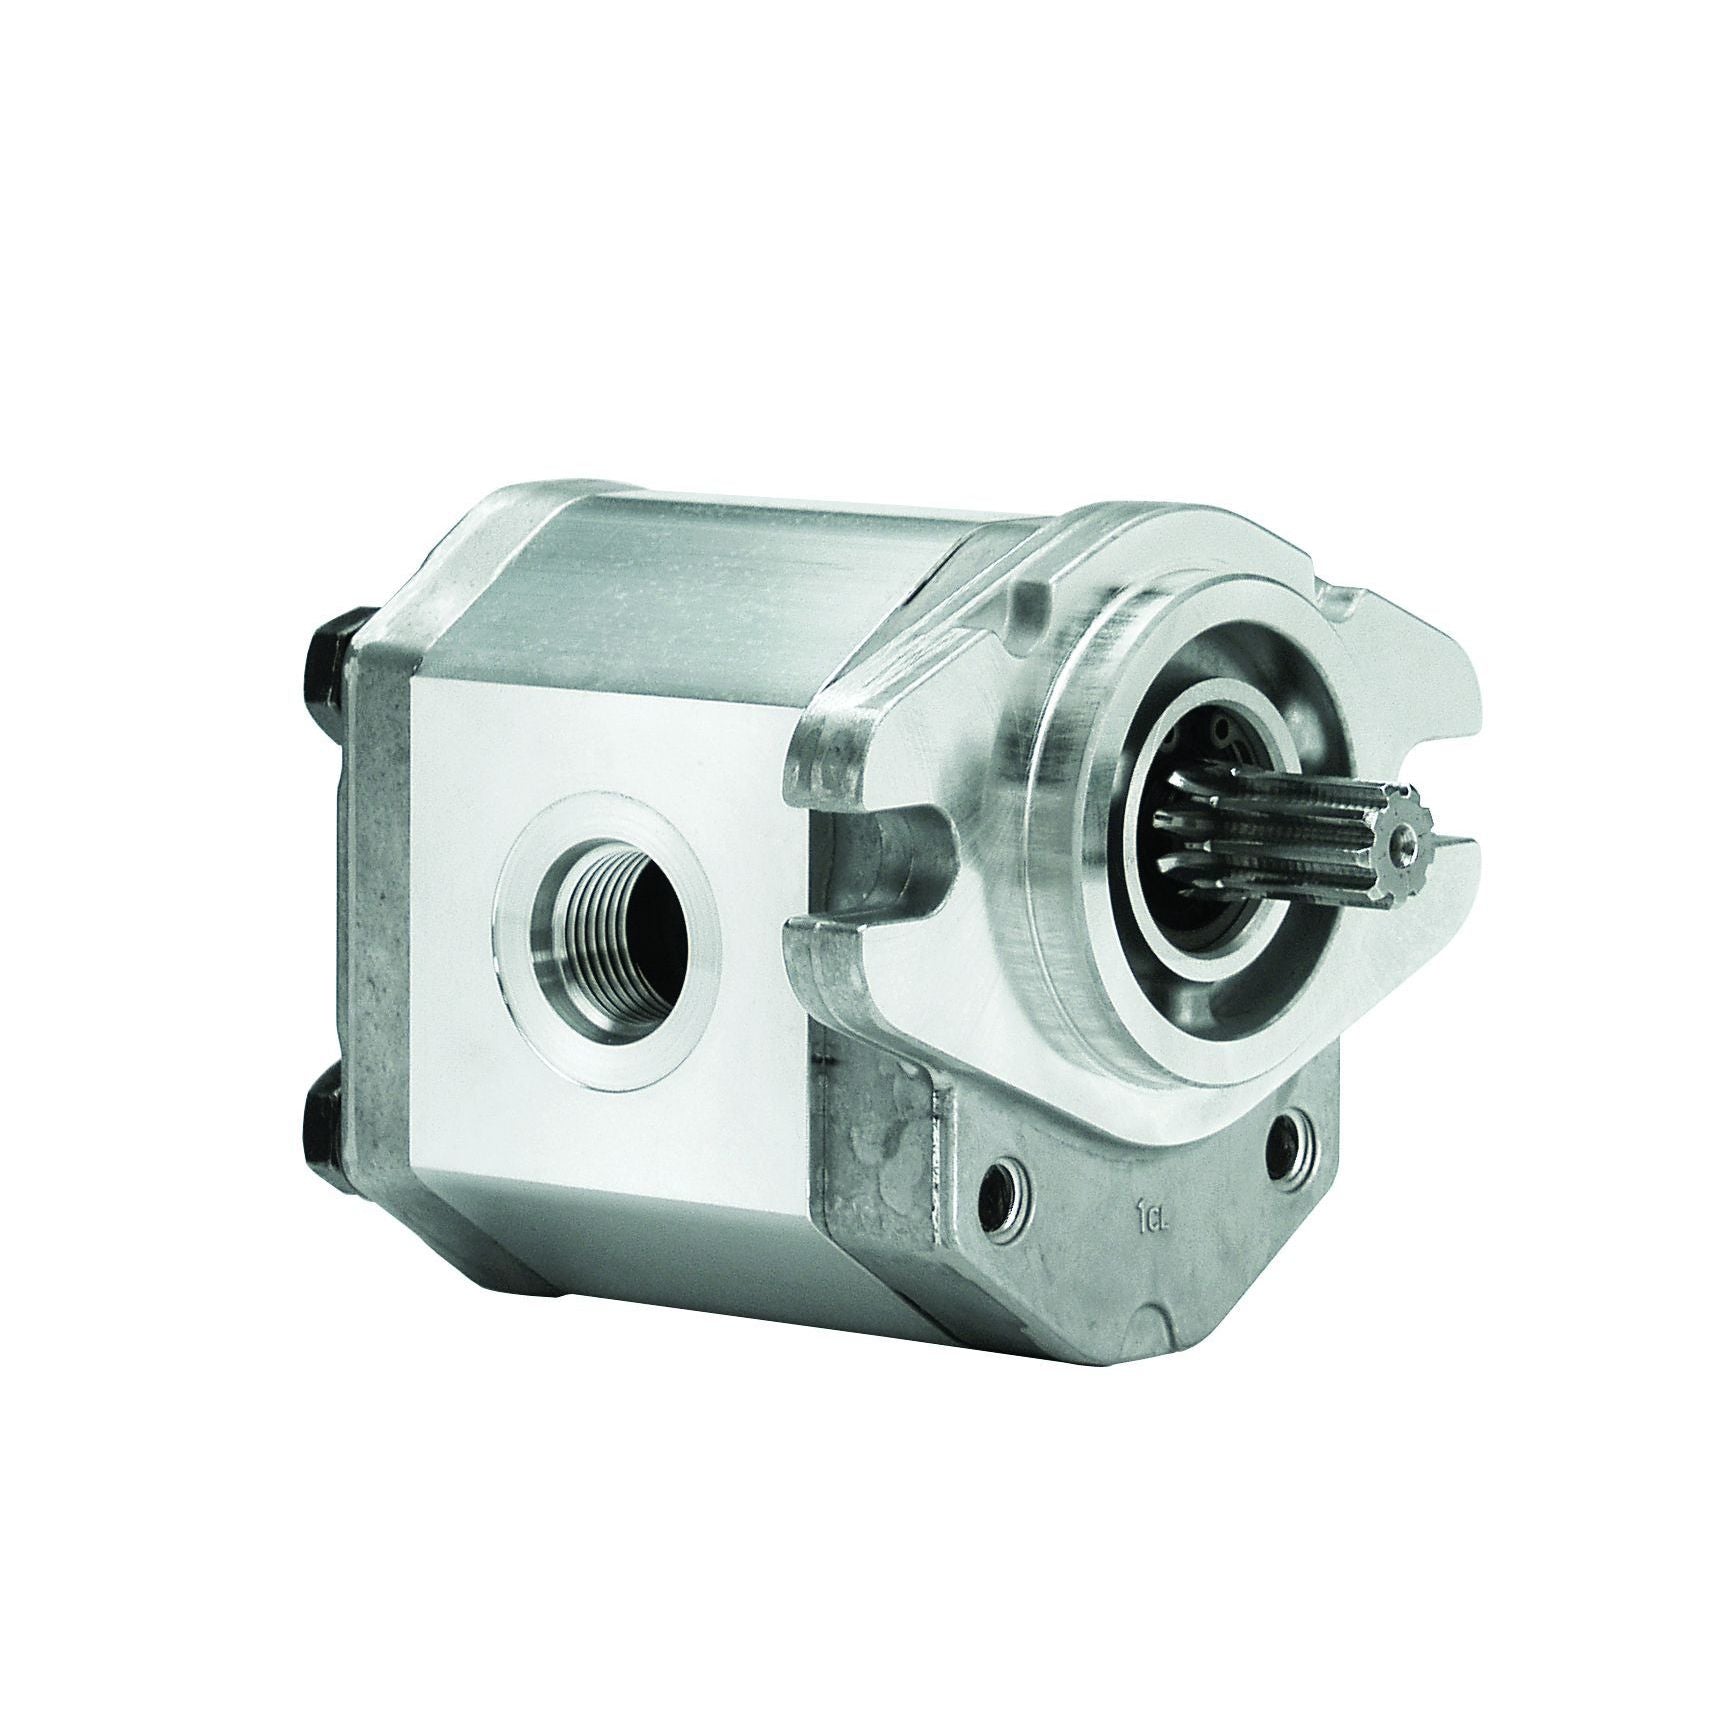 ALP3A-D-80-S1-FA : Marzocchi Gear Pump, CW, 52cc (3.172in3), 24.72 GPM, 2900psi, 2500 RPM, #20 SAE (1.25") In, #12 SAE (3/4") Out, Splined Shaft 13T 16/32DP, SAE B 2-Bolt Mount